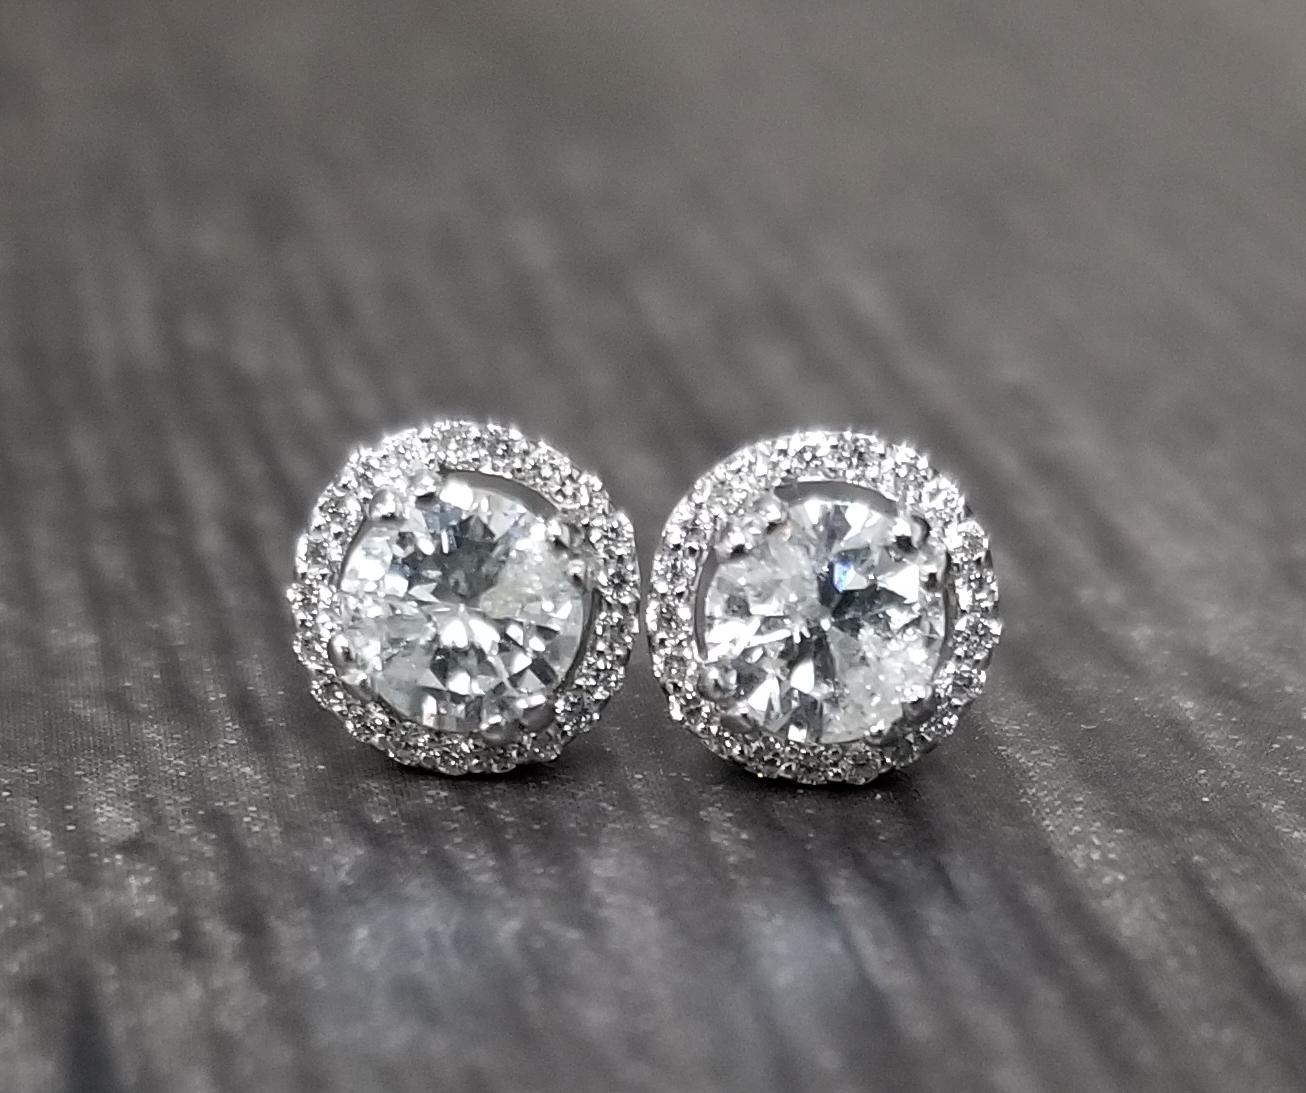 14k white gold diamond stud earrings with halo, containing 2 brilliant cut diamonds; color 